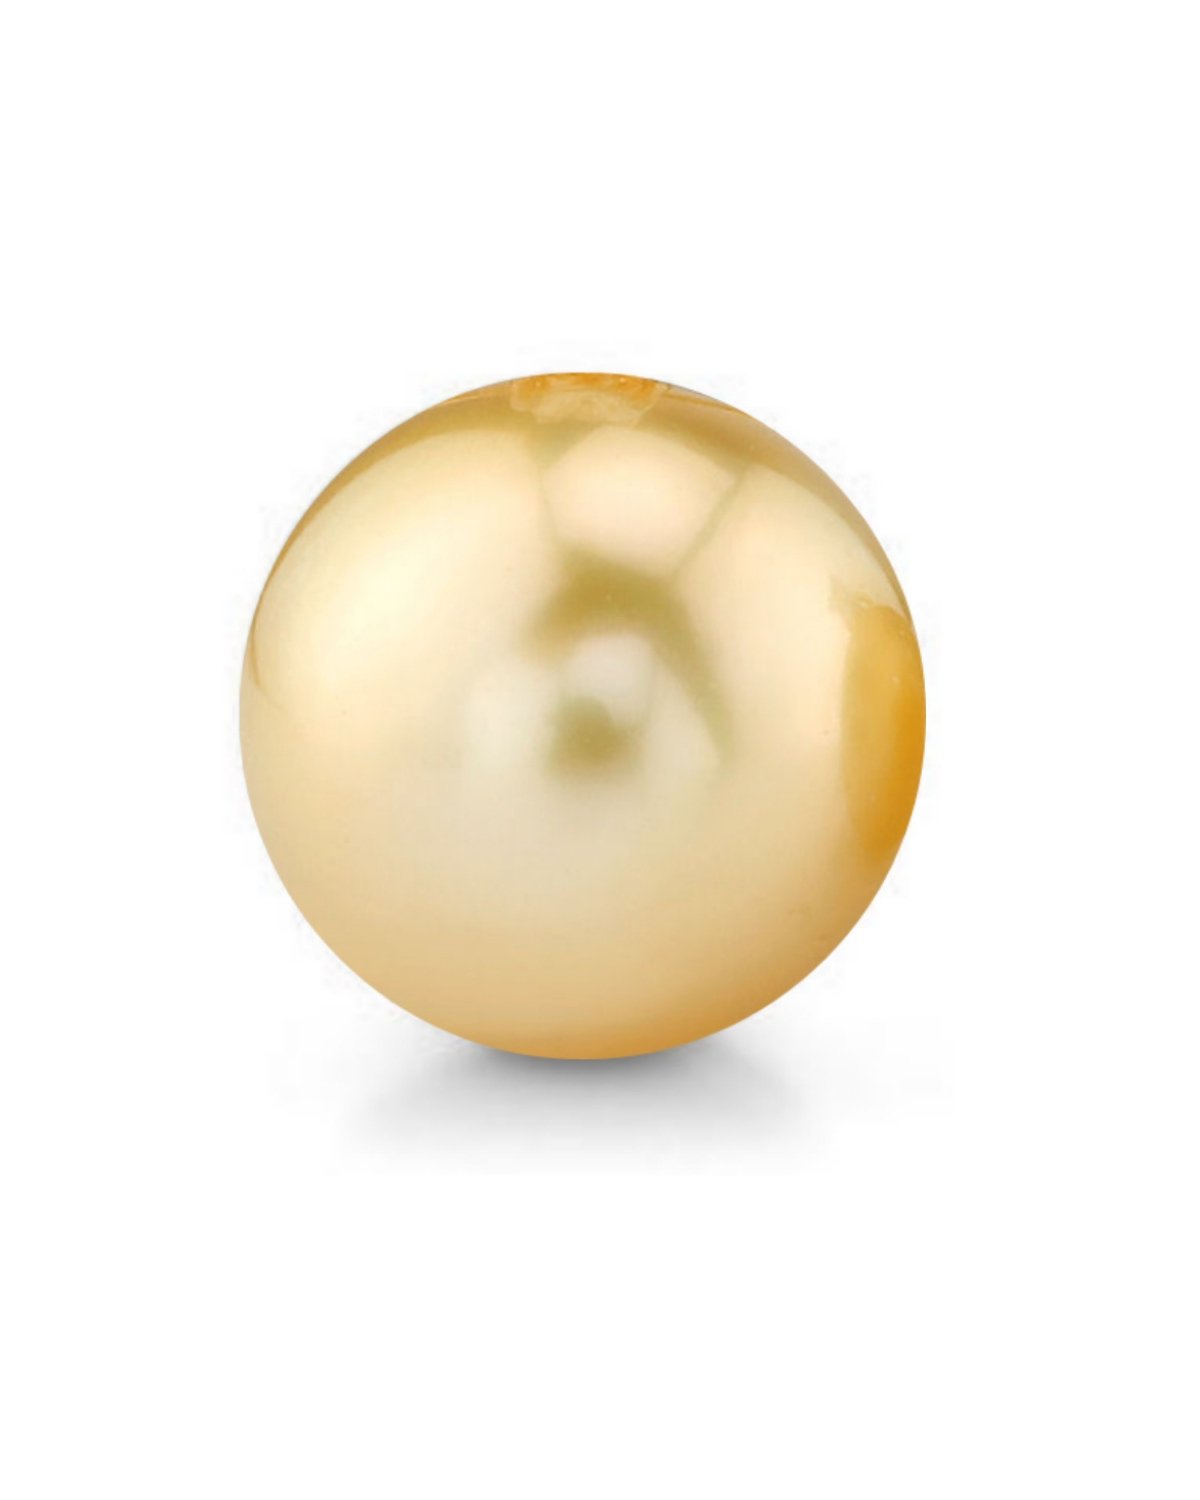 13mm Golden South Sea Loose Pearl